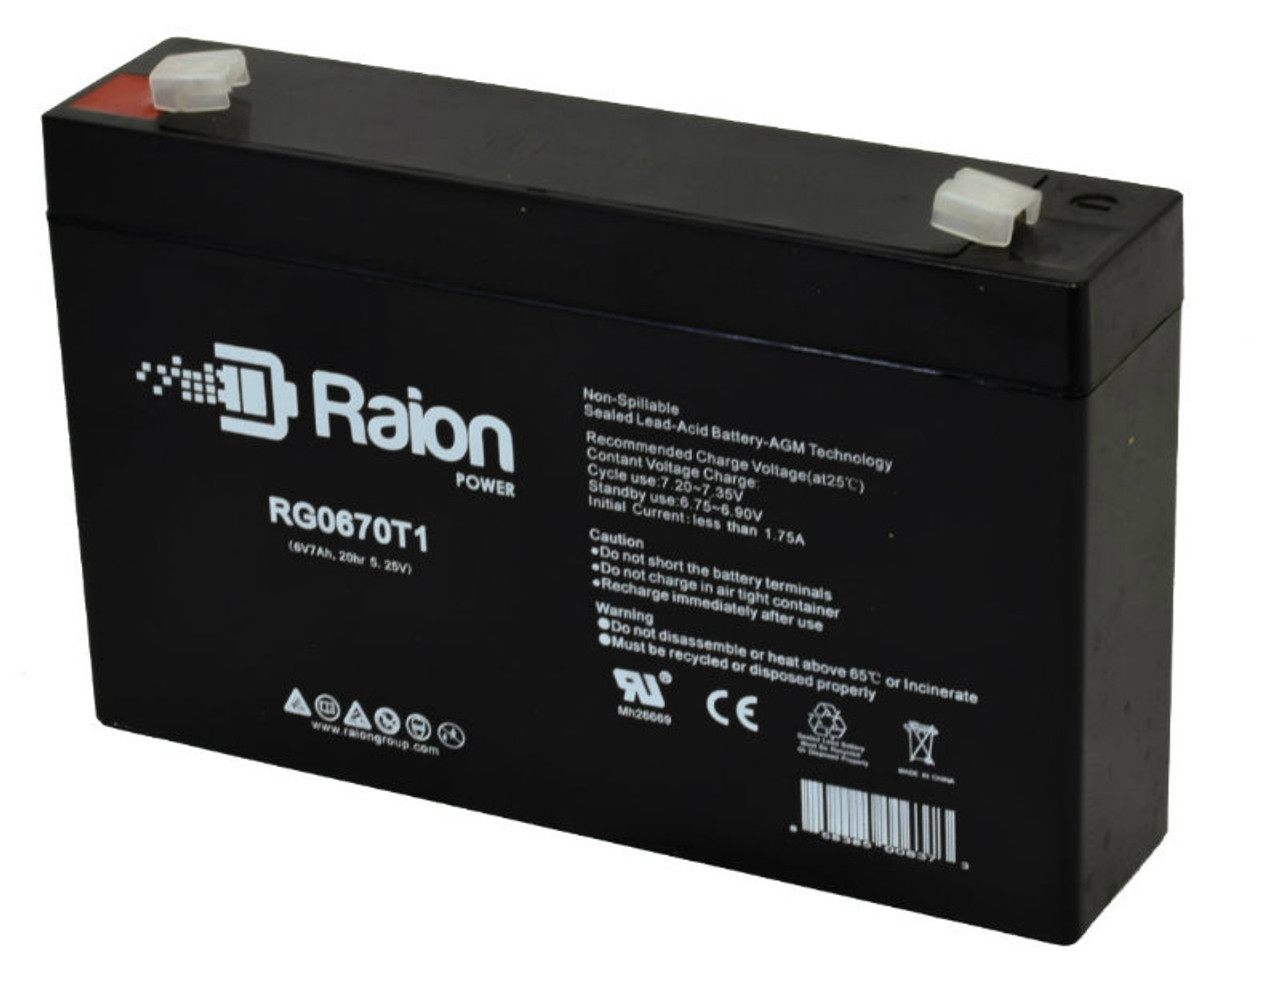 Raion Power RG0670T1 6V 7Ah Replacement Emergency Lighting Battery for Lithonia EMB3065501